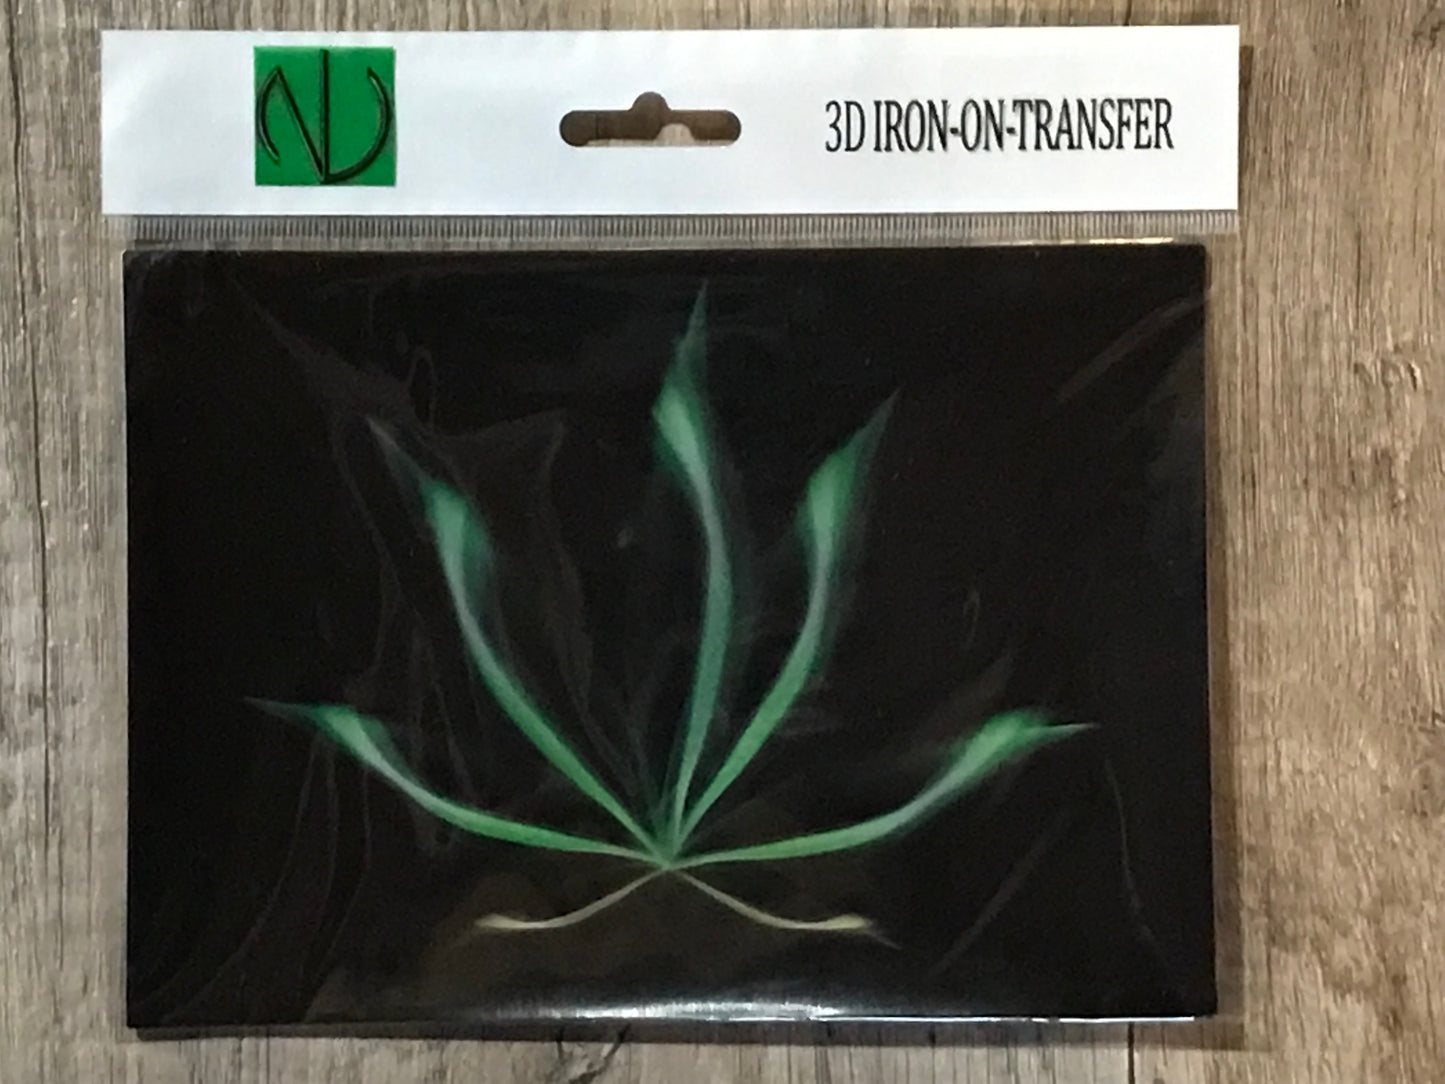 GANJA GHOST 3D LENTICULAR IRON-ON TRANSFER FOR CLOTHING AND ACCESSORIES